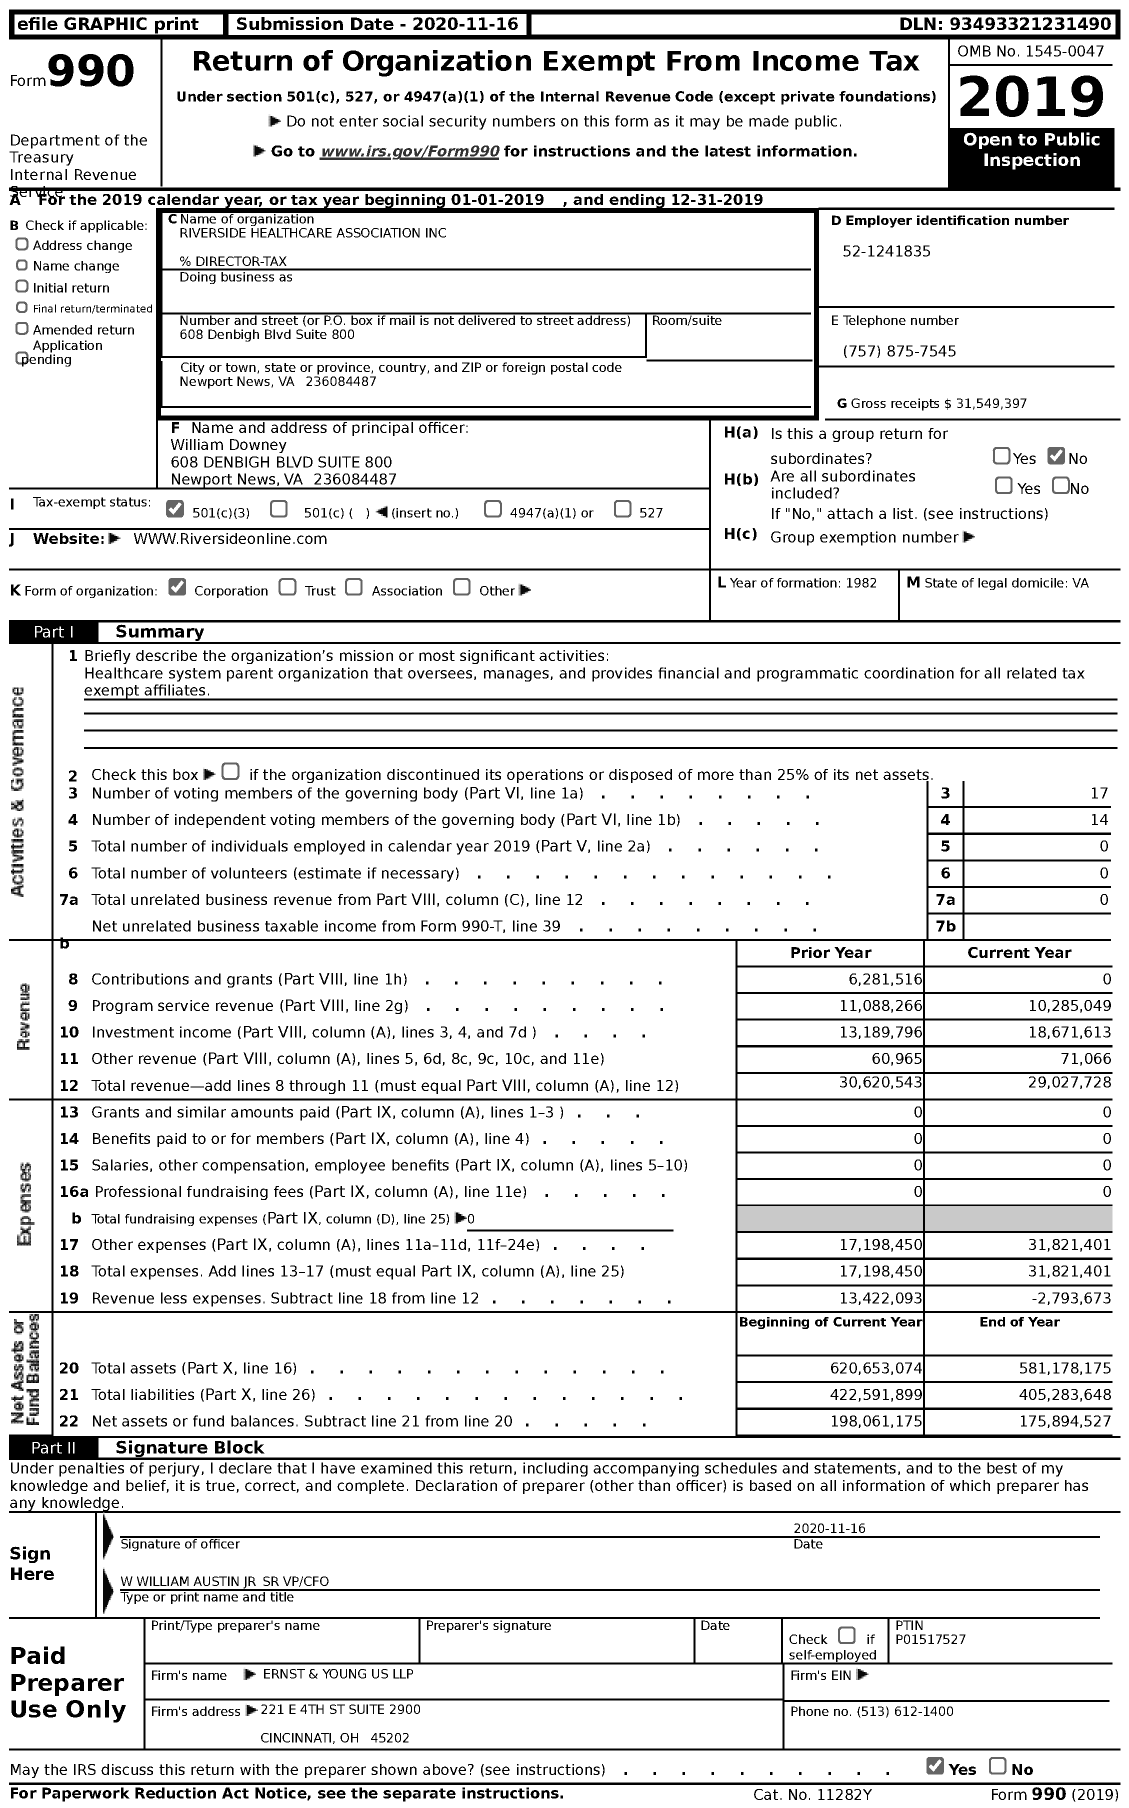 Image of first page of 2019 Form 990 for Riverside Healthcare System (RHS)